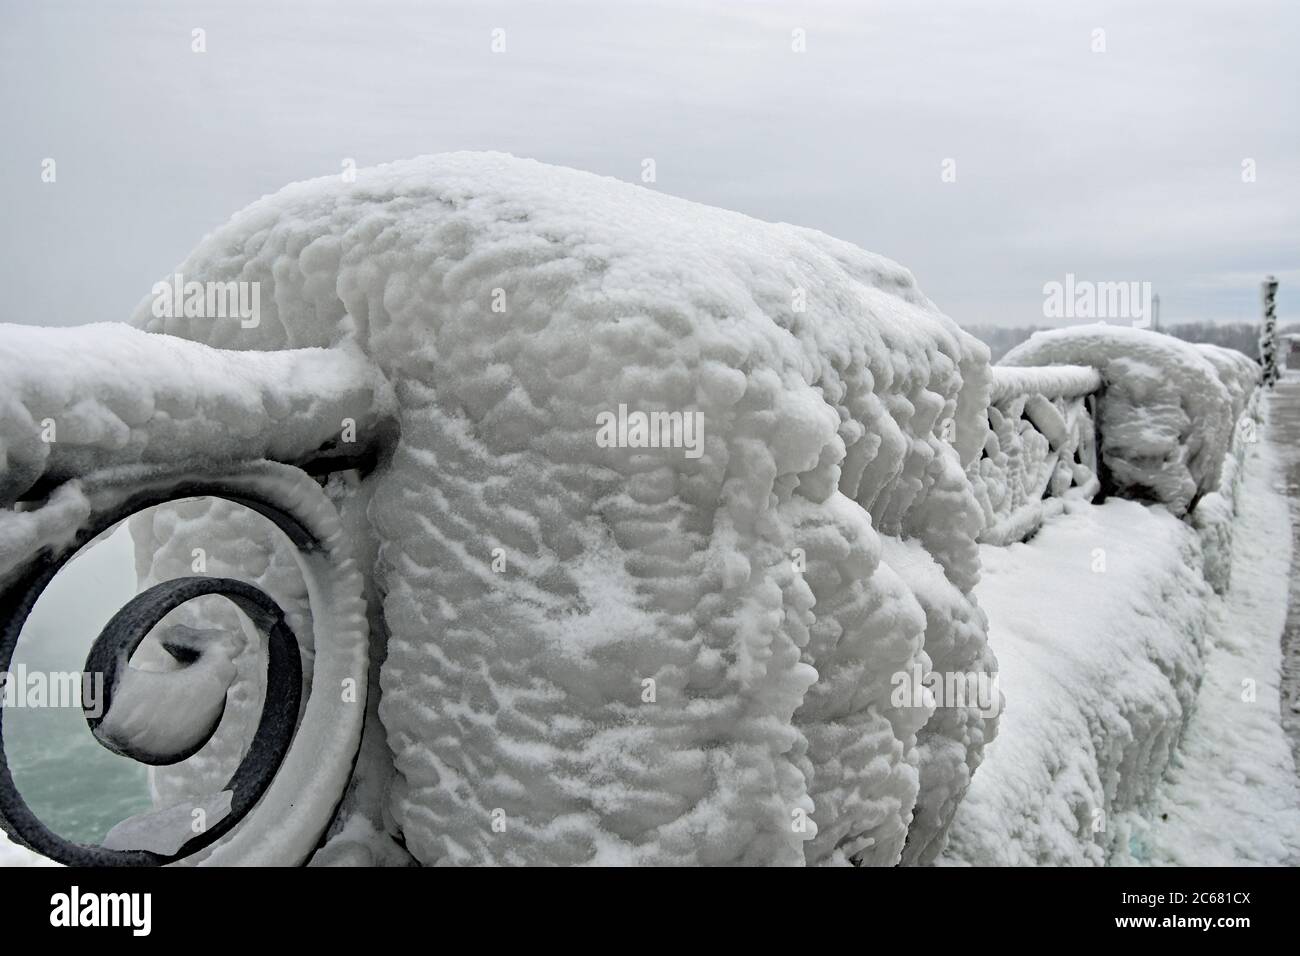 Ornate railings along the edge of Niagara falls covered in thick white ice due to the mist from the falls. Stock Photo